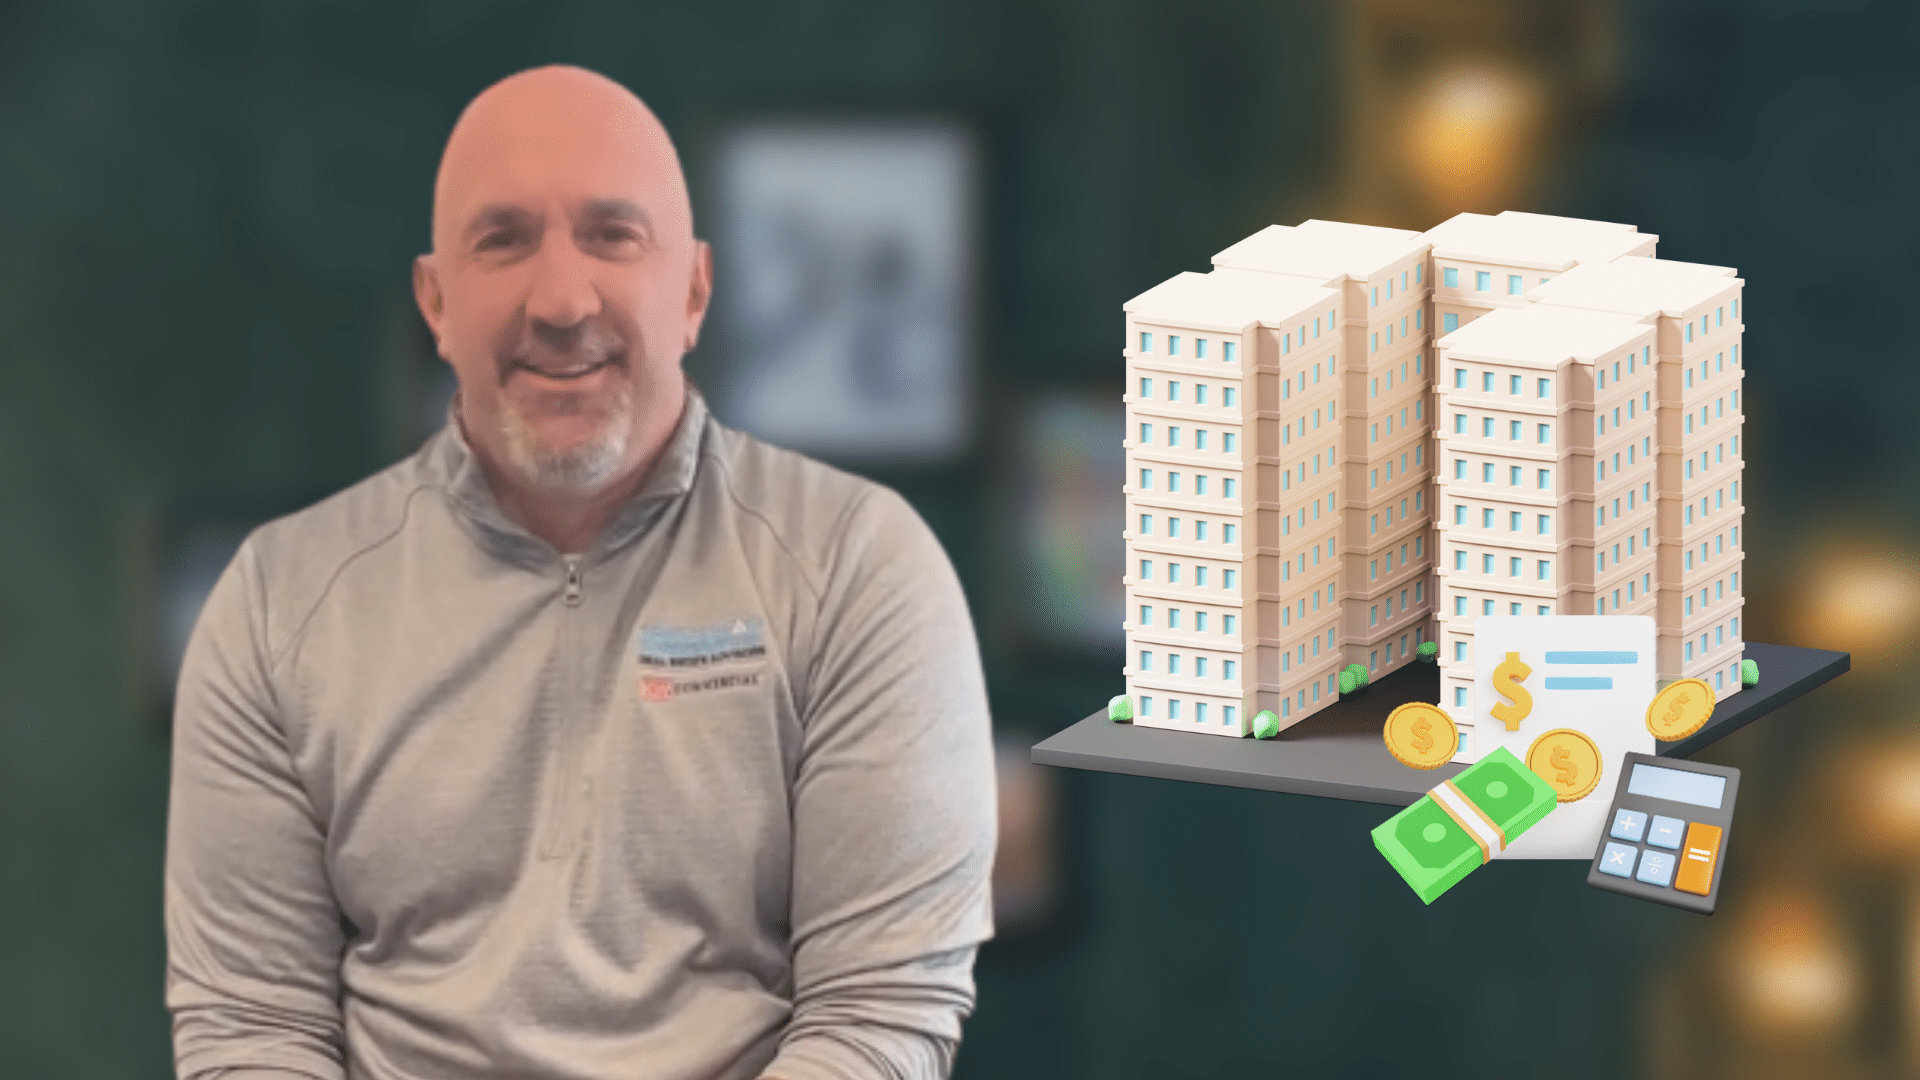 Scott explains what to consider when purchasing commercial real estate